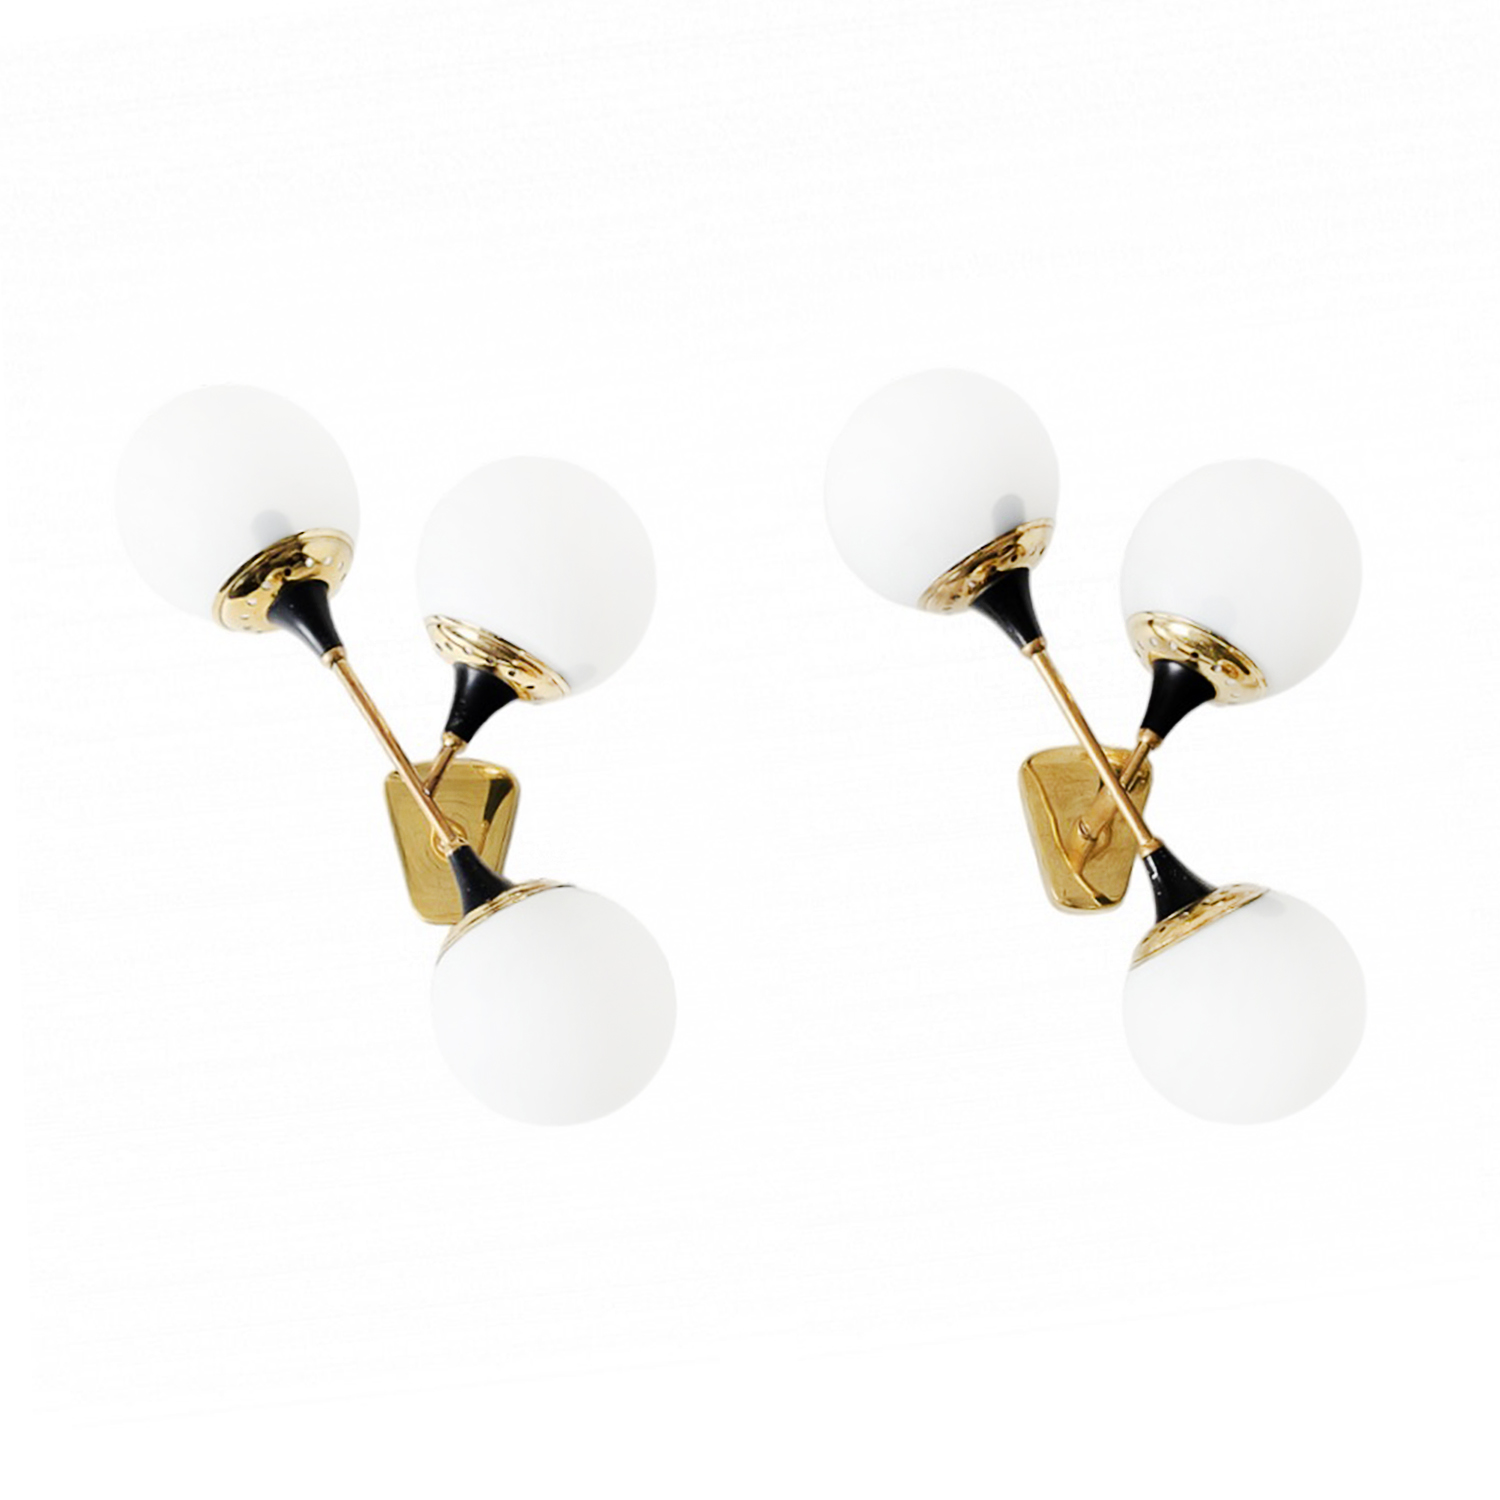 20th Century Italian Modern Pair of Vintage Opaline Glass Wall Lamps by Stilnovo